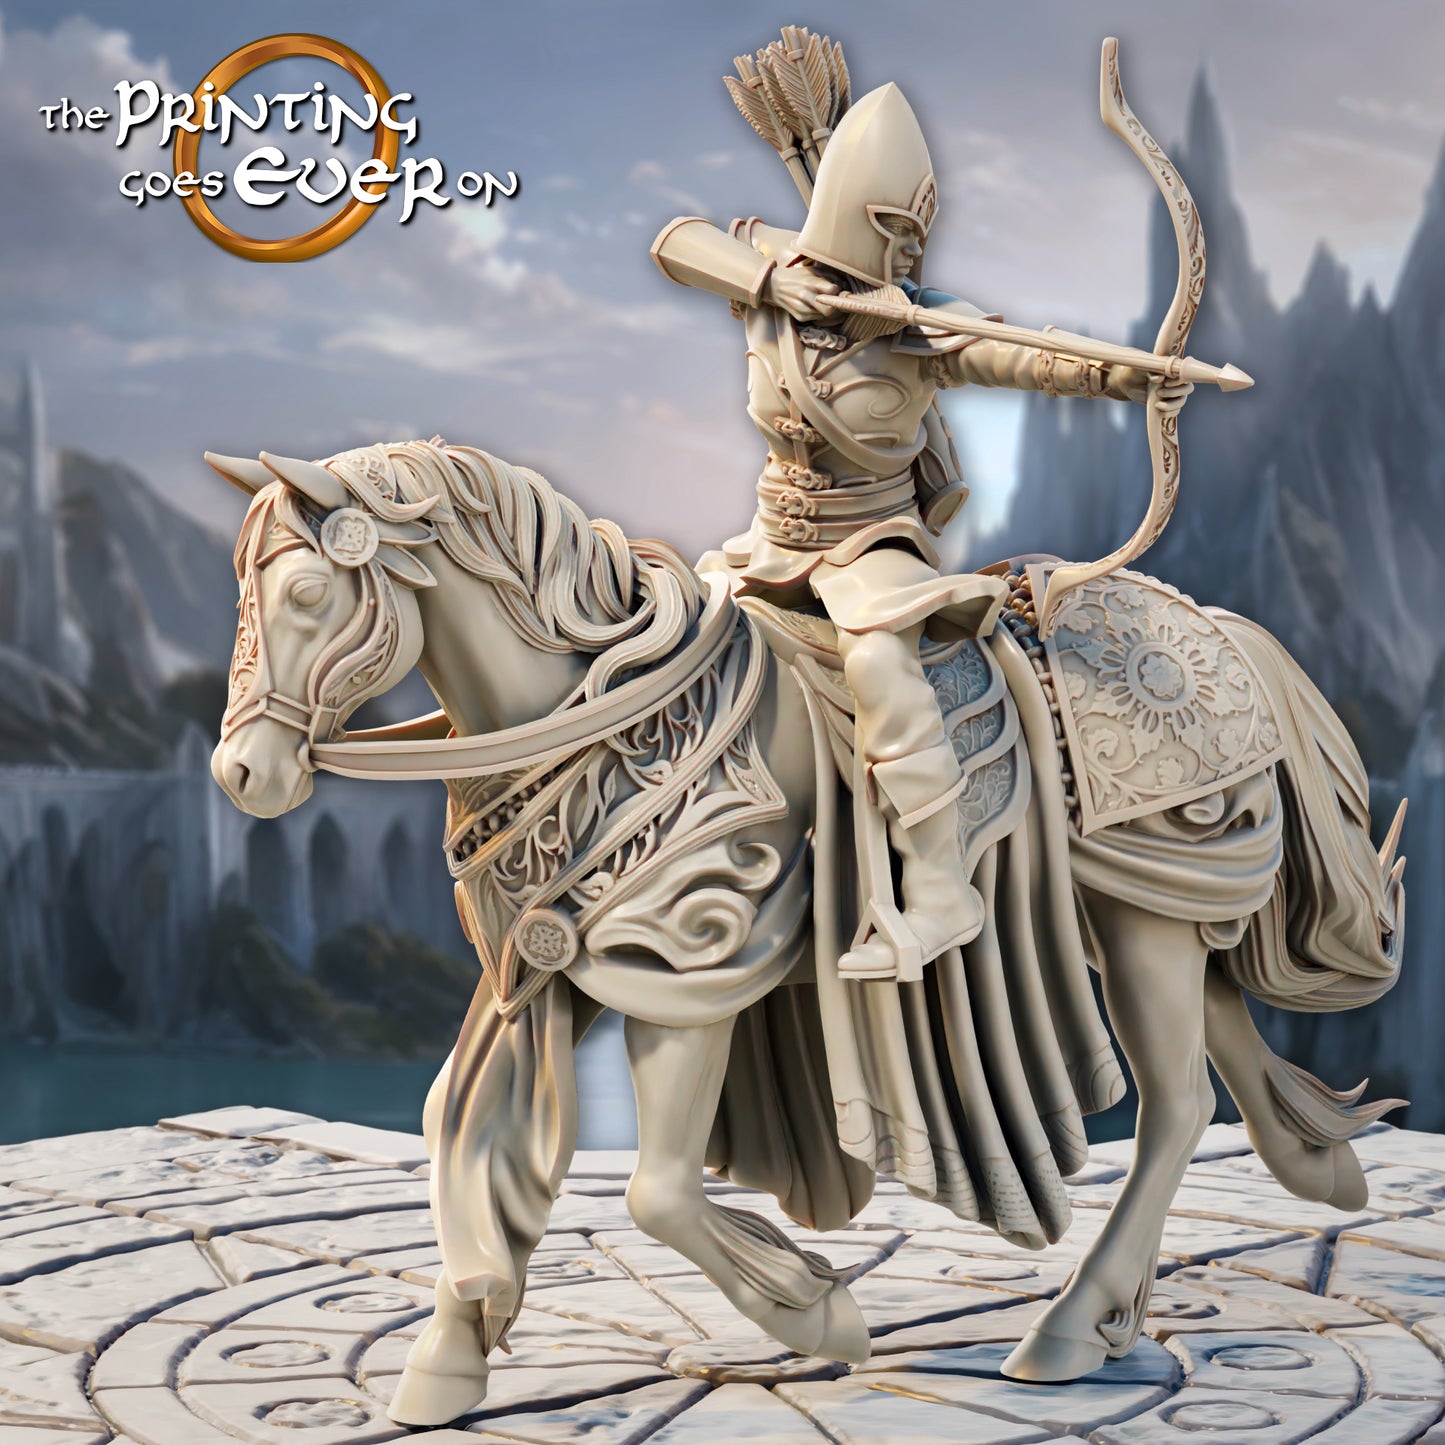 Elven Mounted Archers | Silver Shores | MESBG | The Printing Goes Ever On